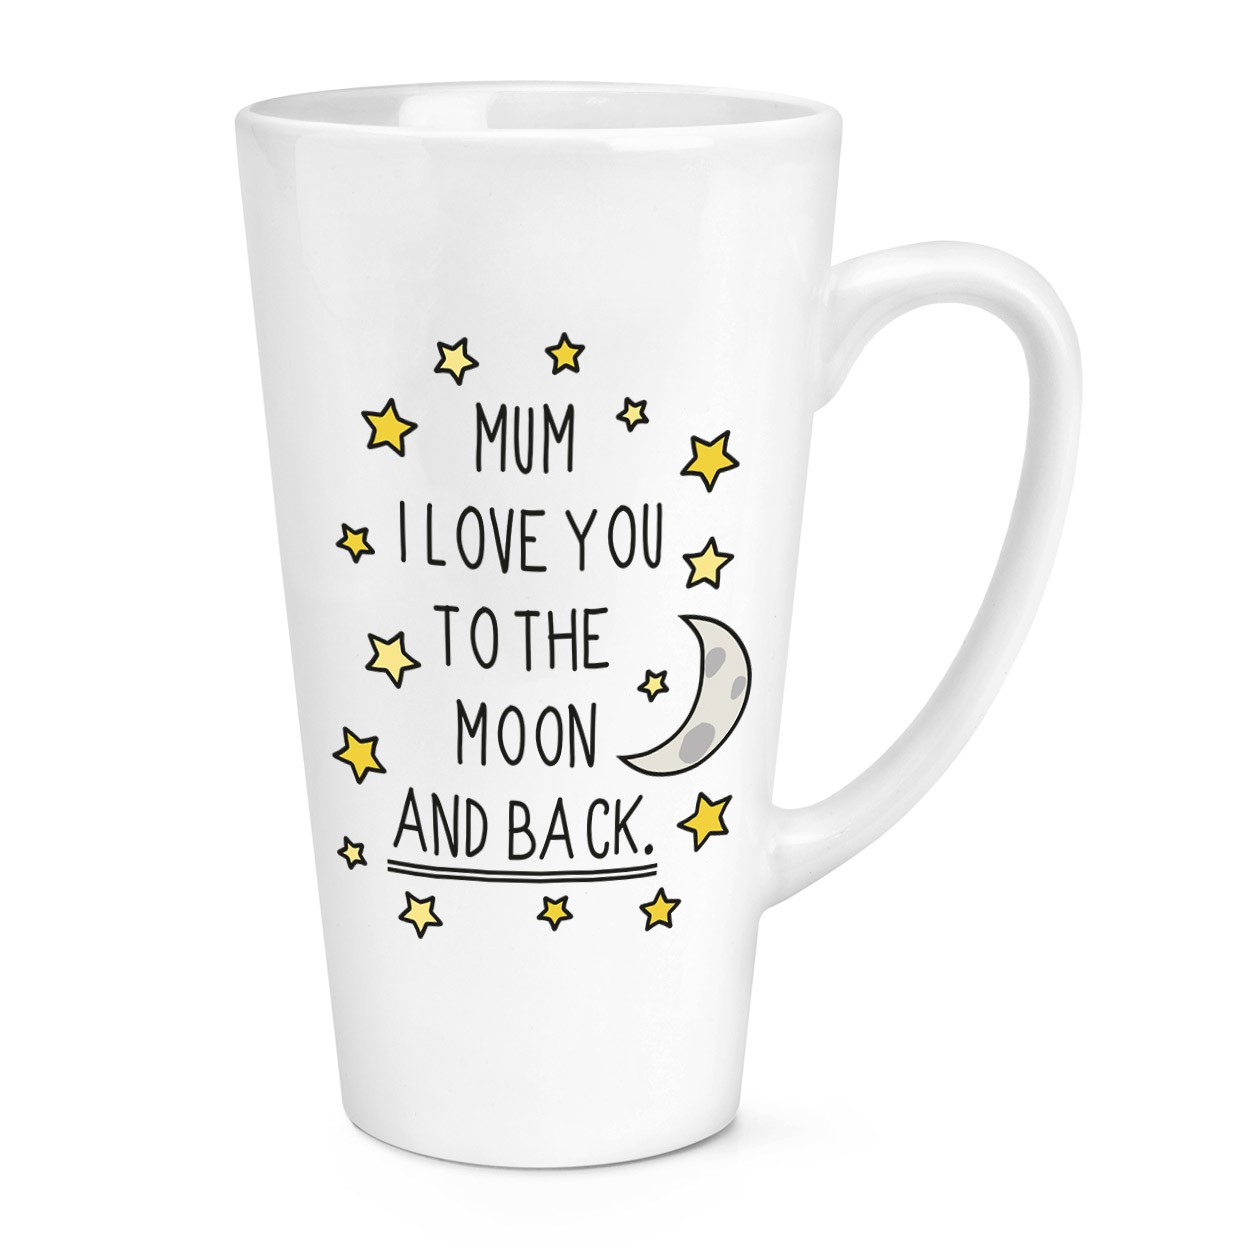 Mum I Love You To The Moon And Back 17oz Large Latte Mug Cup